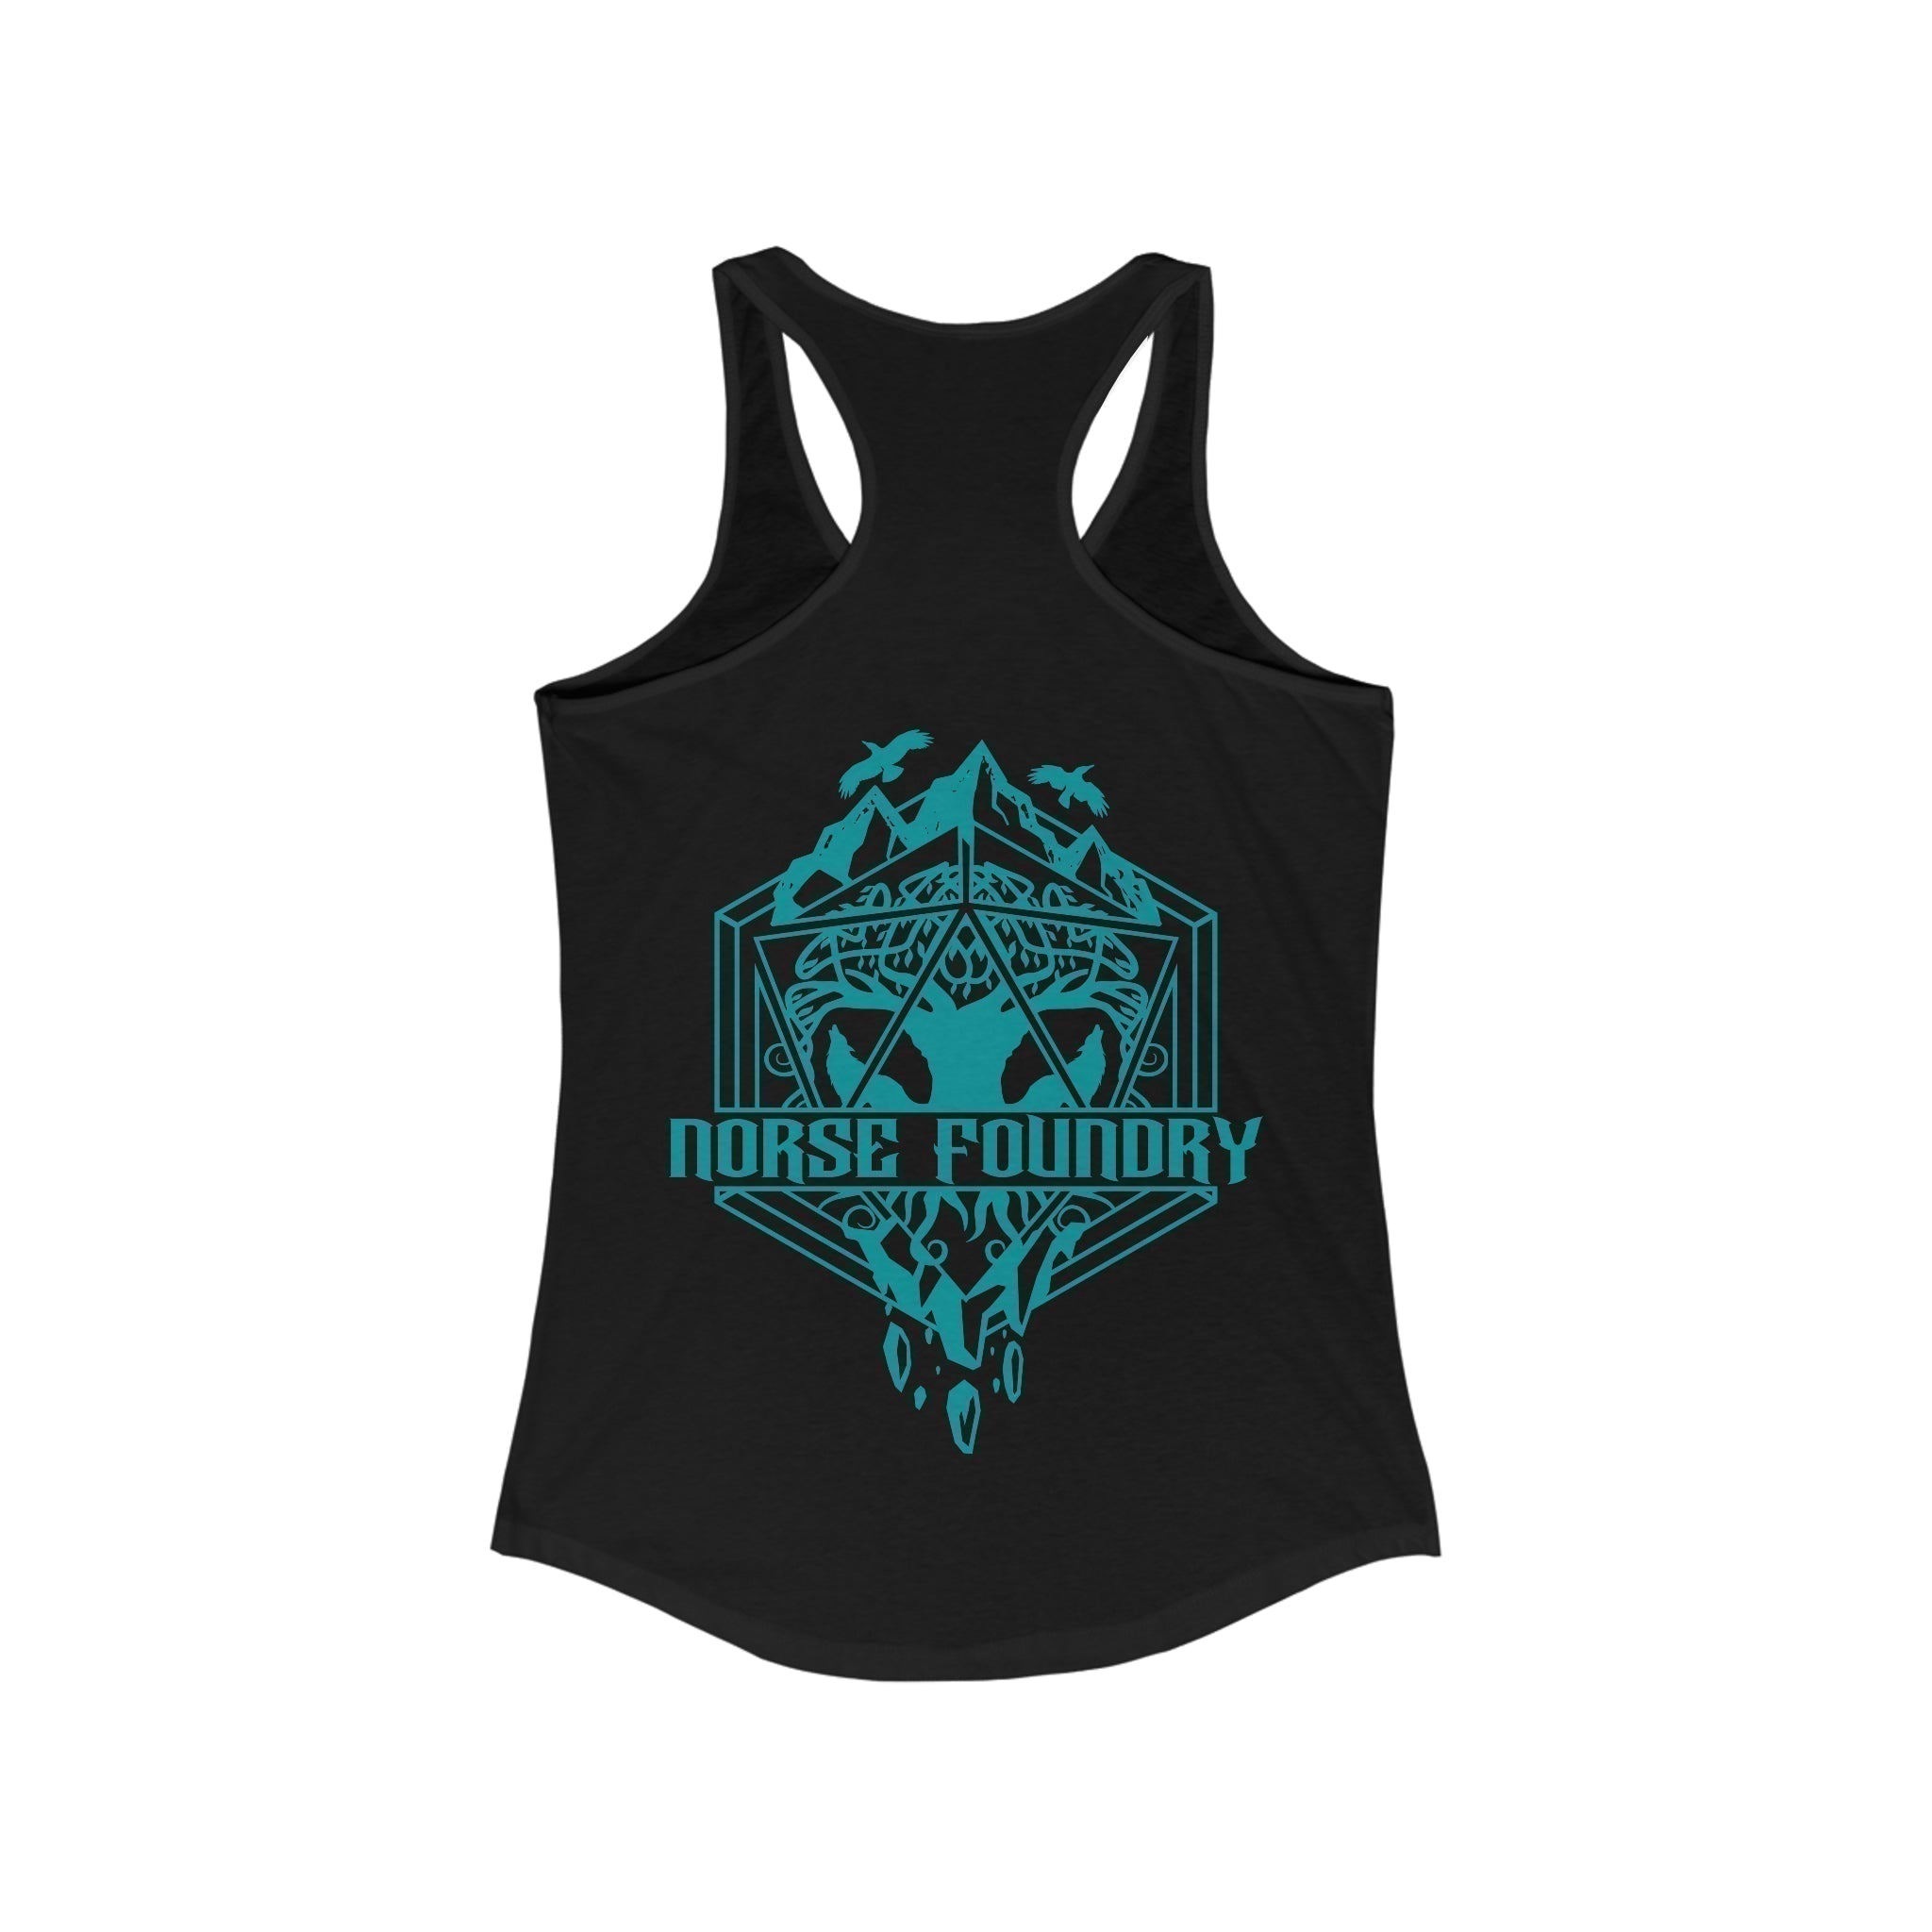 Roll for Adventure - Norse Foundry Women's Tank Top - 26933978634445184878